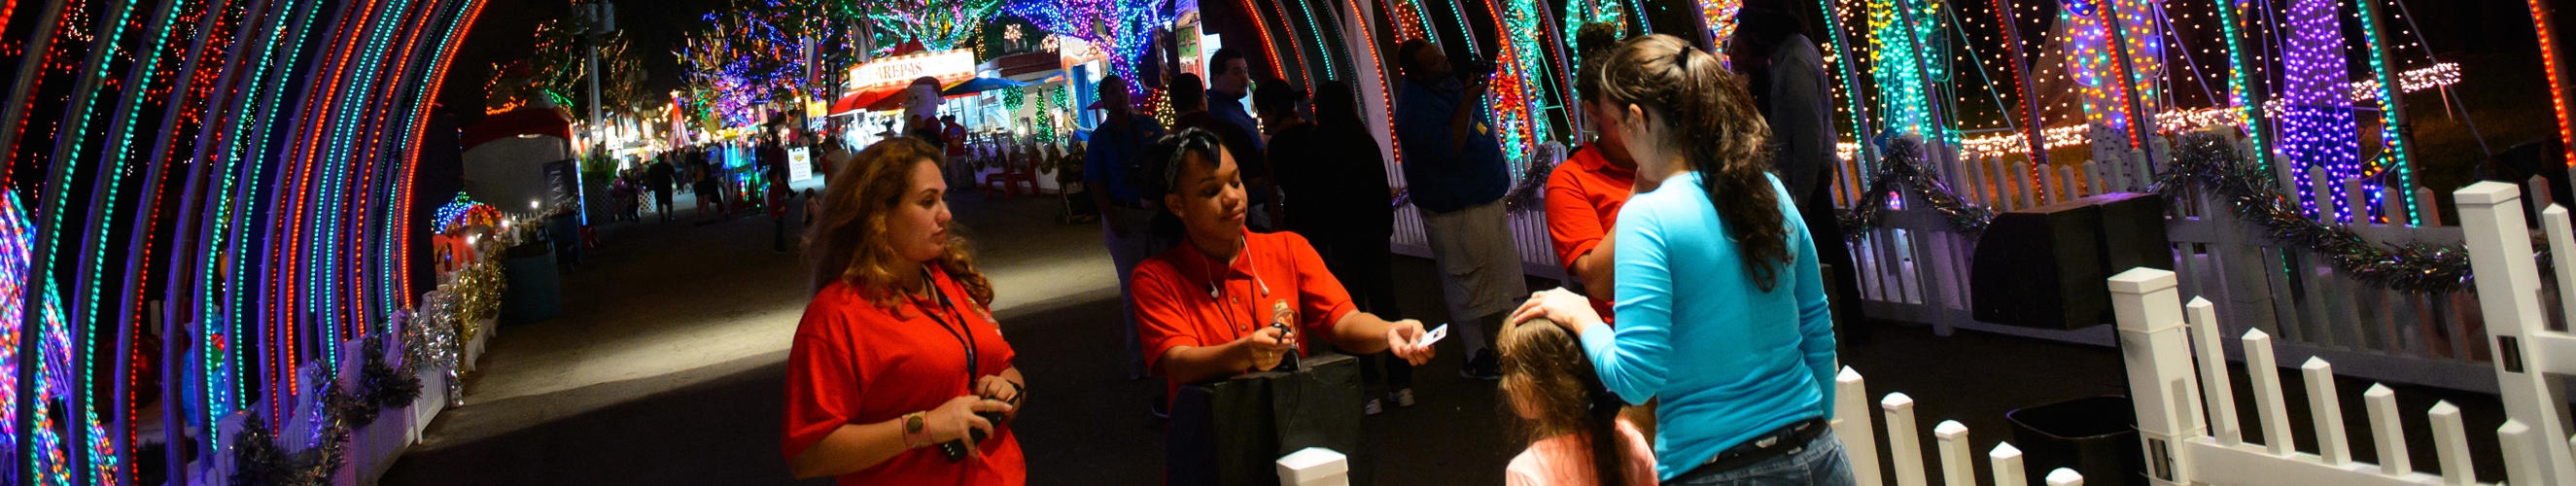 Employment Opportunities at Santa's Enchanted Forest